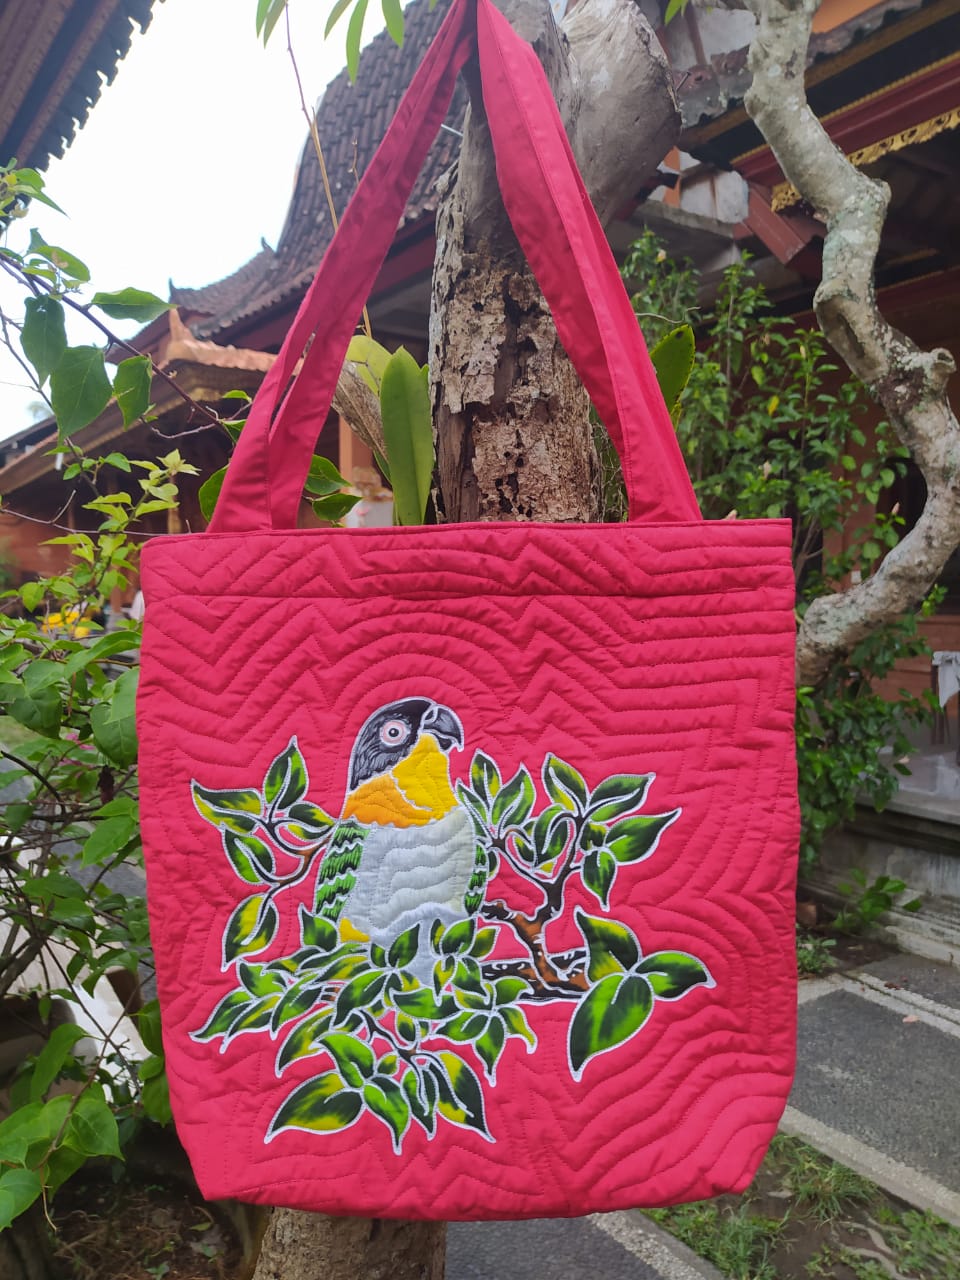 Artistic Hand-Painted Red Bag for a Unique Look Painting by